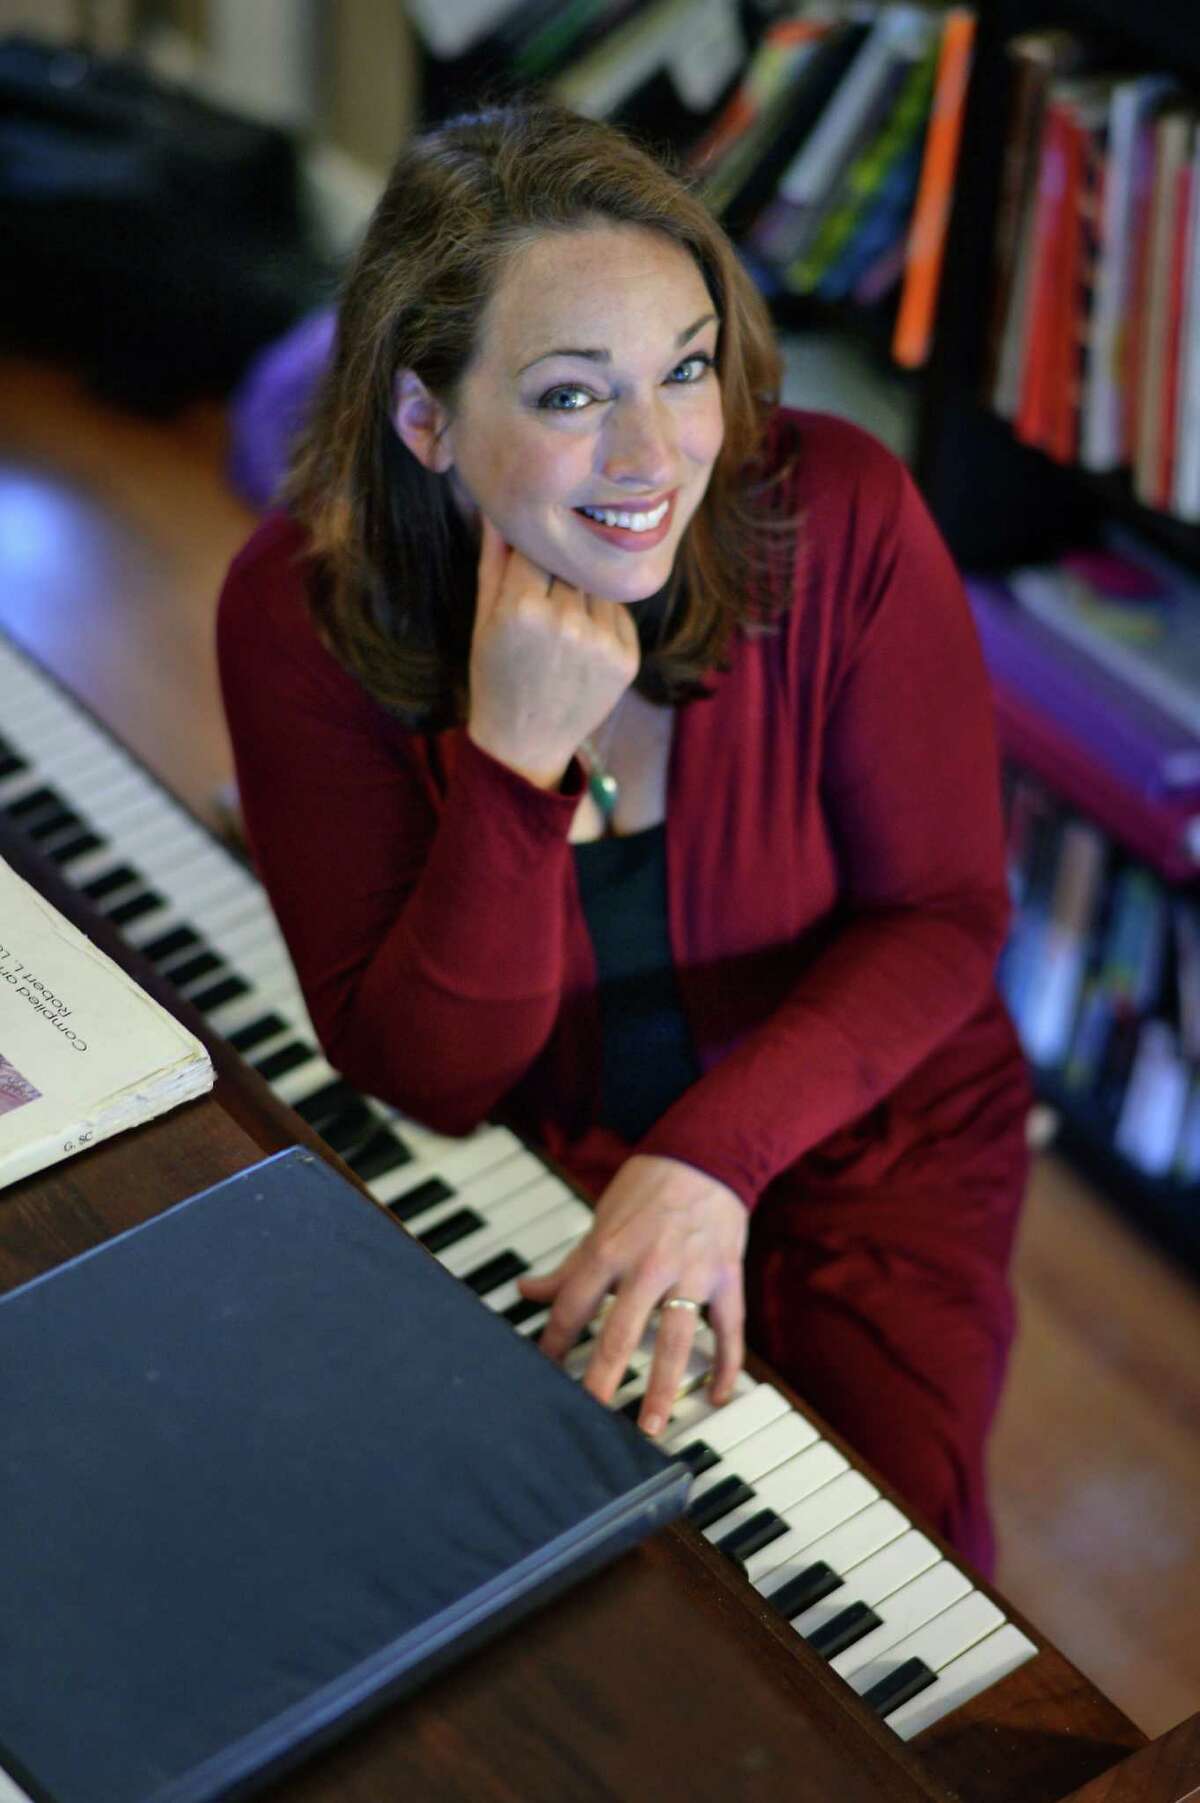 Soprano Carla Fisk in the teaching and studio space at her home on Tuesday, May 24, 2016, in Albany, NY. (John Carl D'Annibale / Times Union)